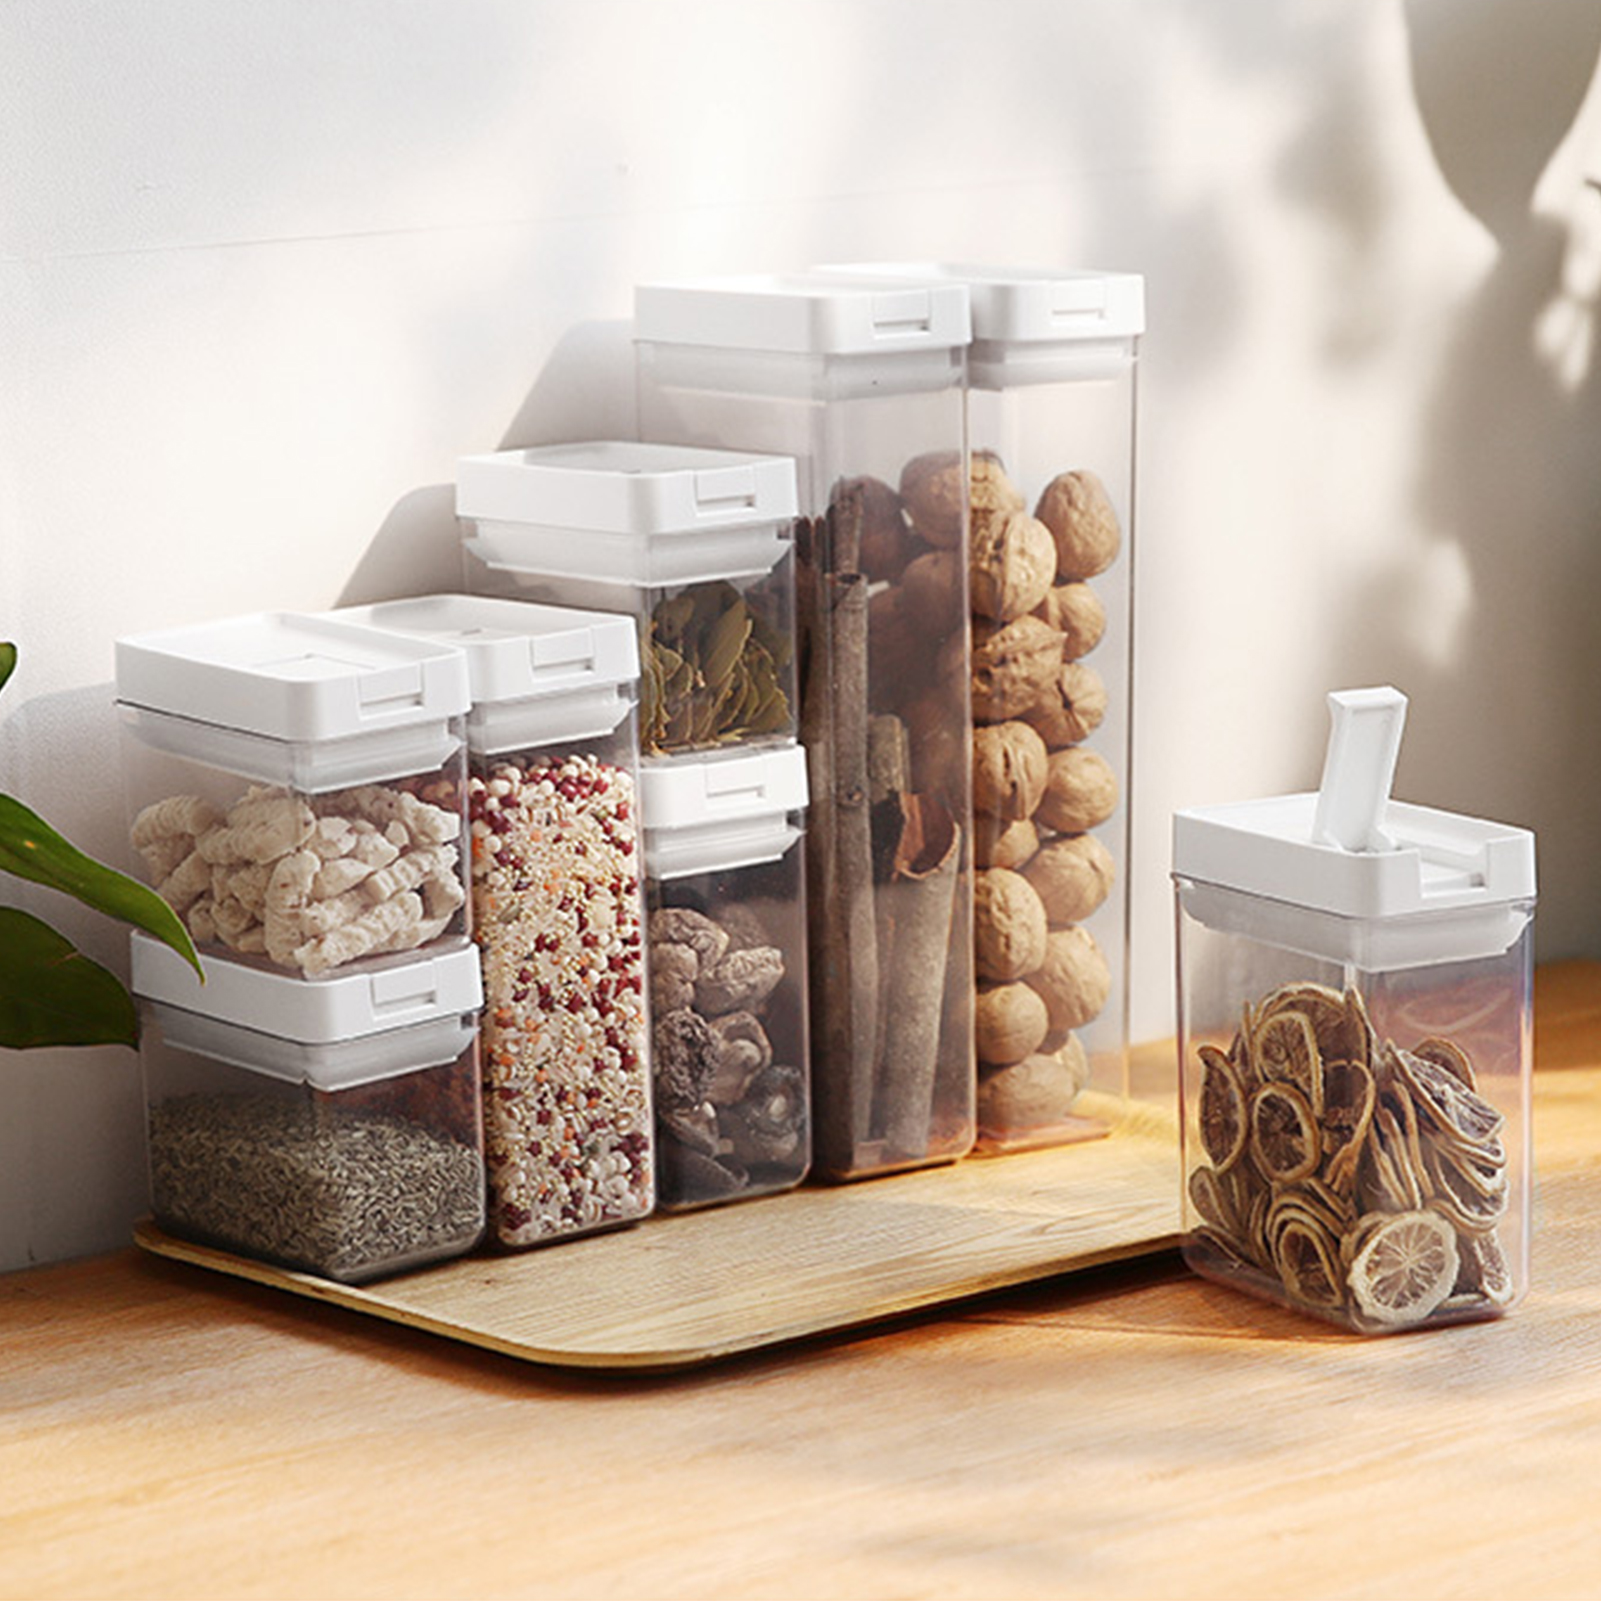 Ludlz Cereal Container, Airtight Dry Food Storage Containers, BPA Free Large Kitchen Pantry Storage Container Square Cereal Organizer Bottle for Flour, Snacks, Nuts & More - image 3 of 7